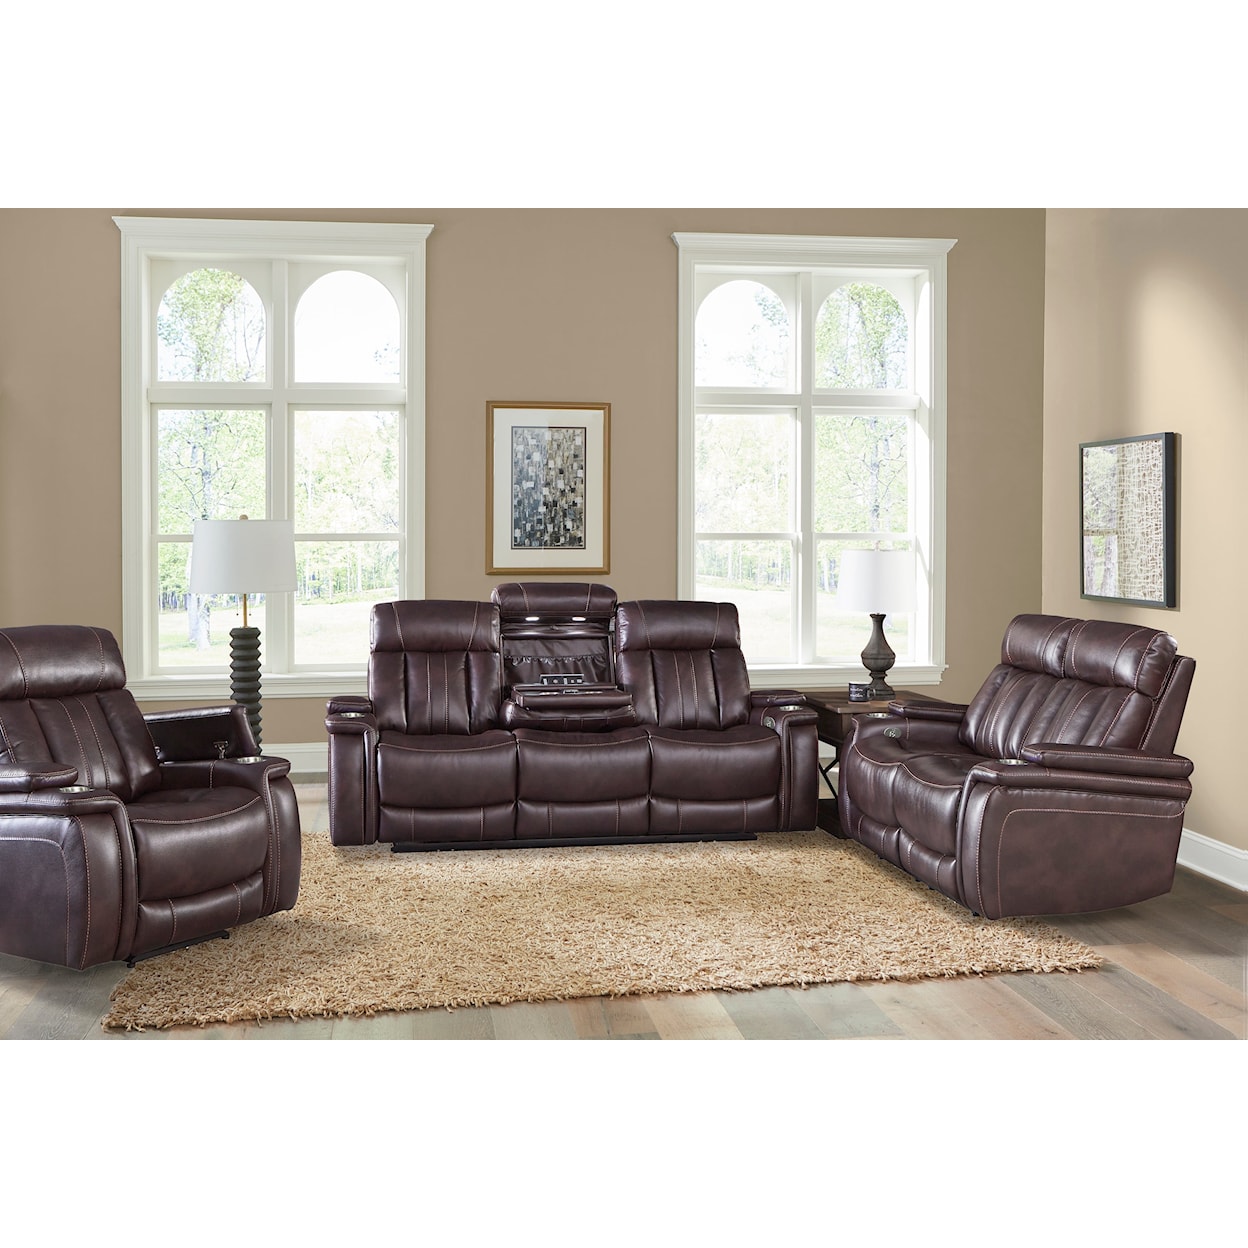 Paramount Living Royce Living Room Collection